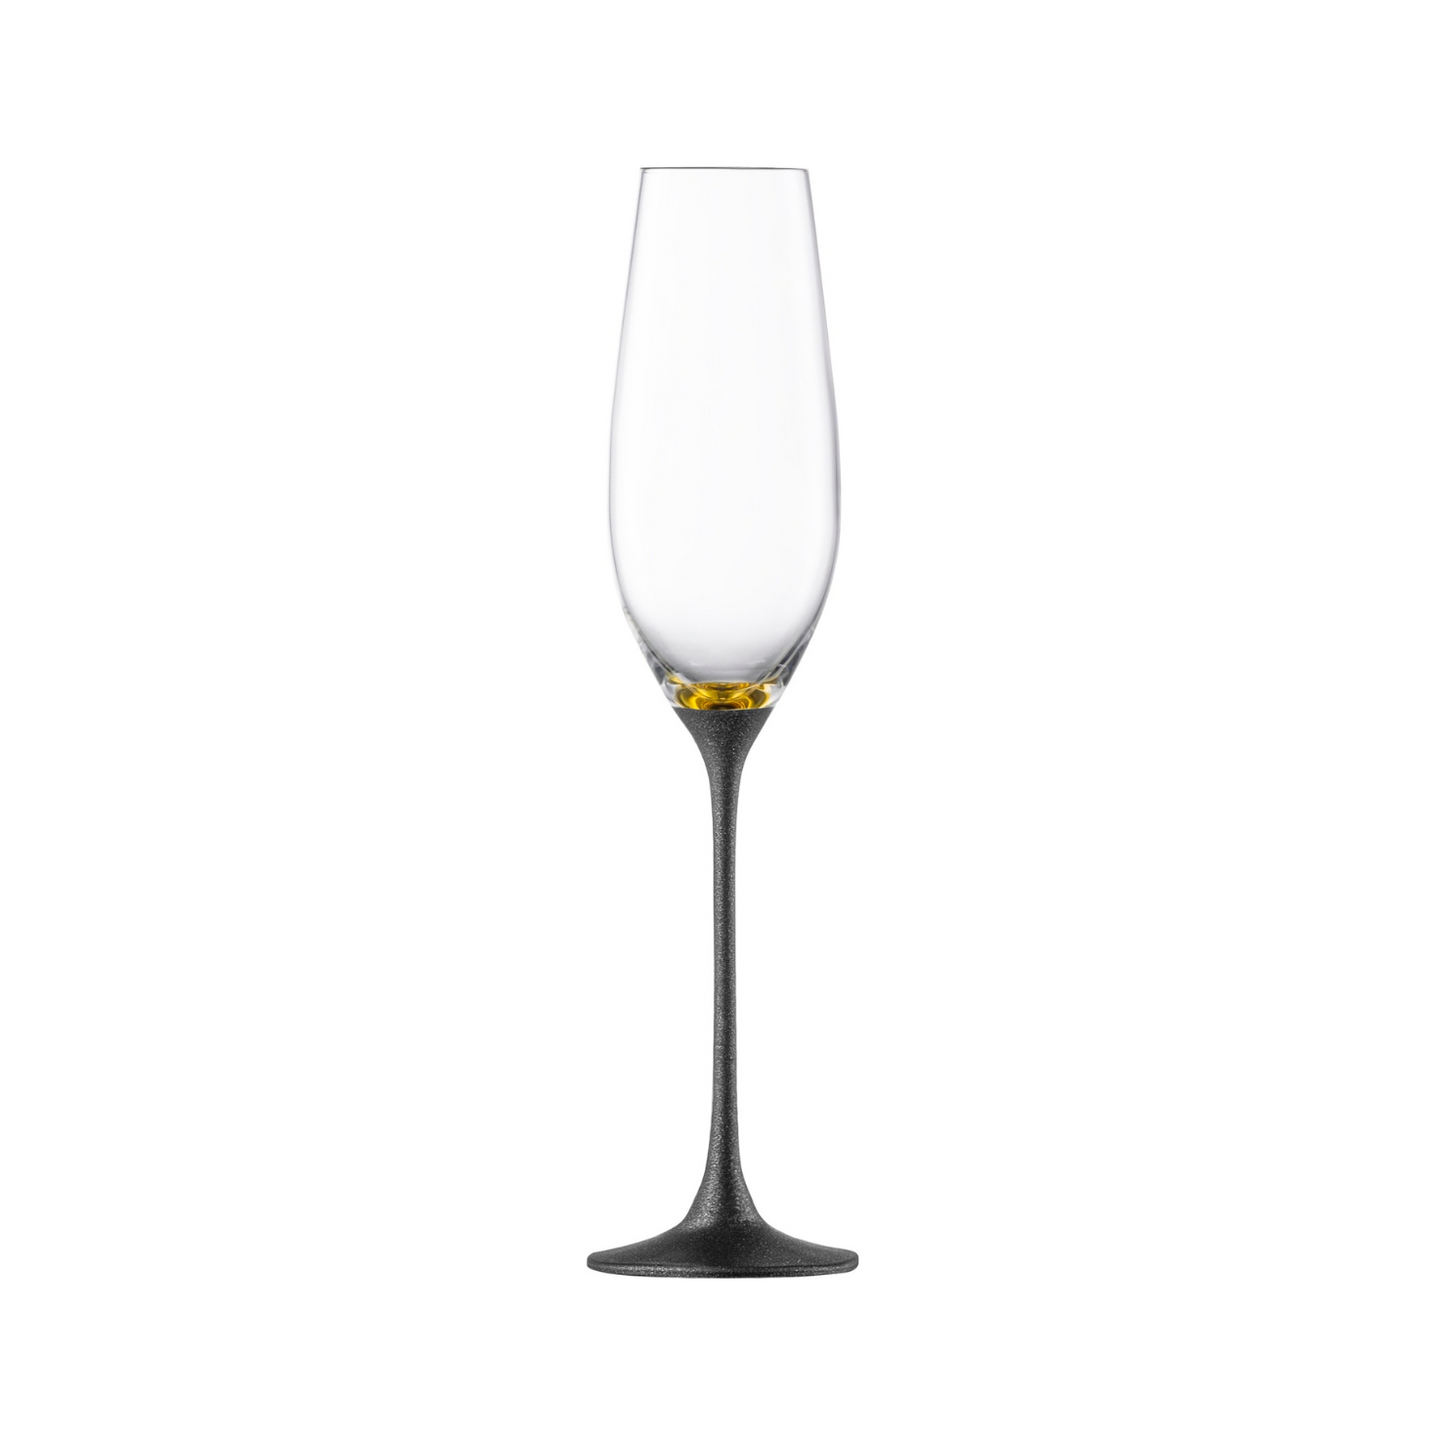 Champagne Exclusive Glass, Gold & Black, Set of 2